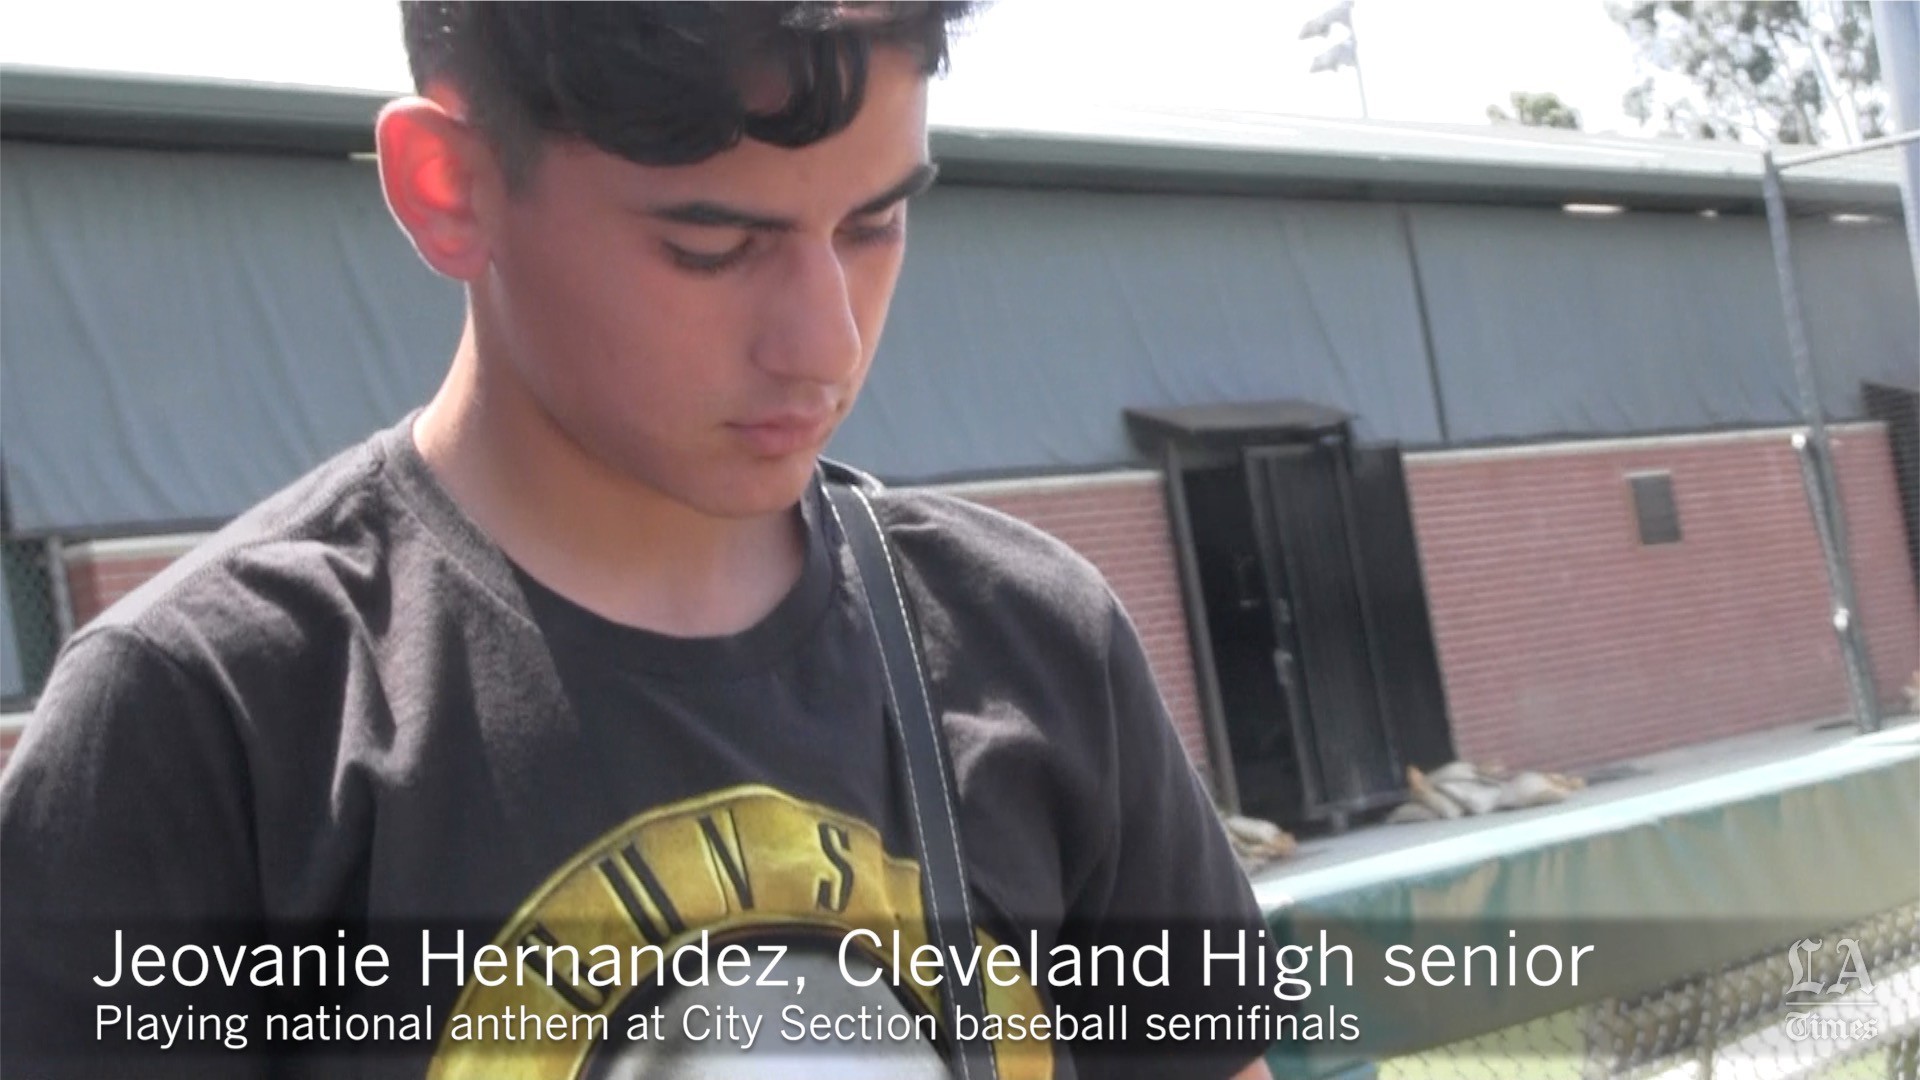 Jeovanie Hernandez of Cleveland shows how to play national anthem on electric guitar ...